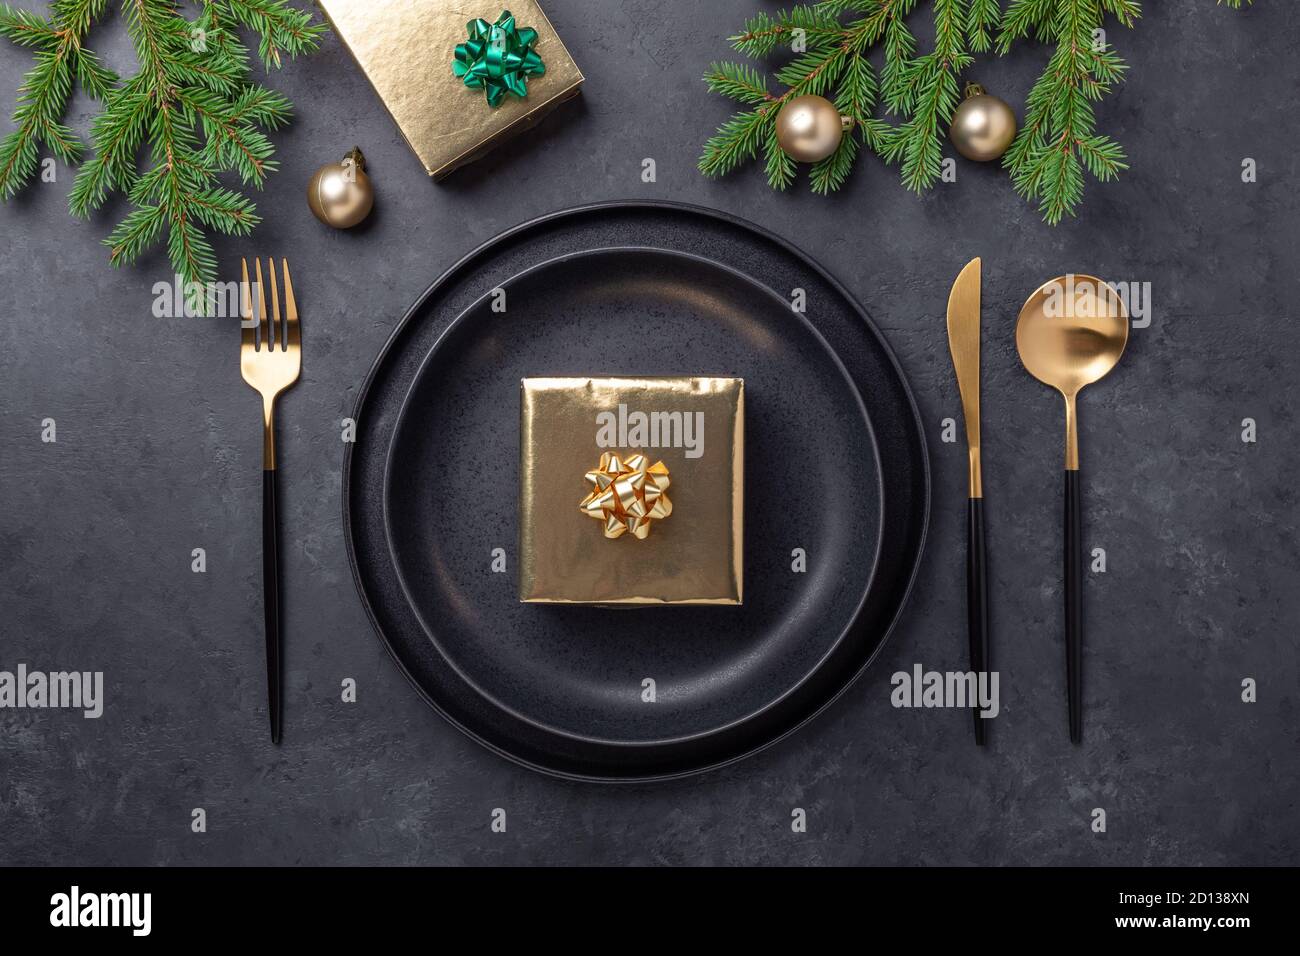 Christmas table setting. Black ceramic plate with golden gift box, fir tree  branch and accessories on stone background. Gold decoration - Image Stock  Photo - Alamy